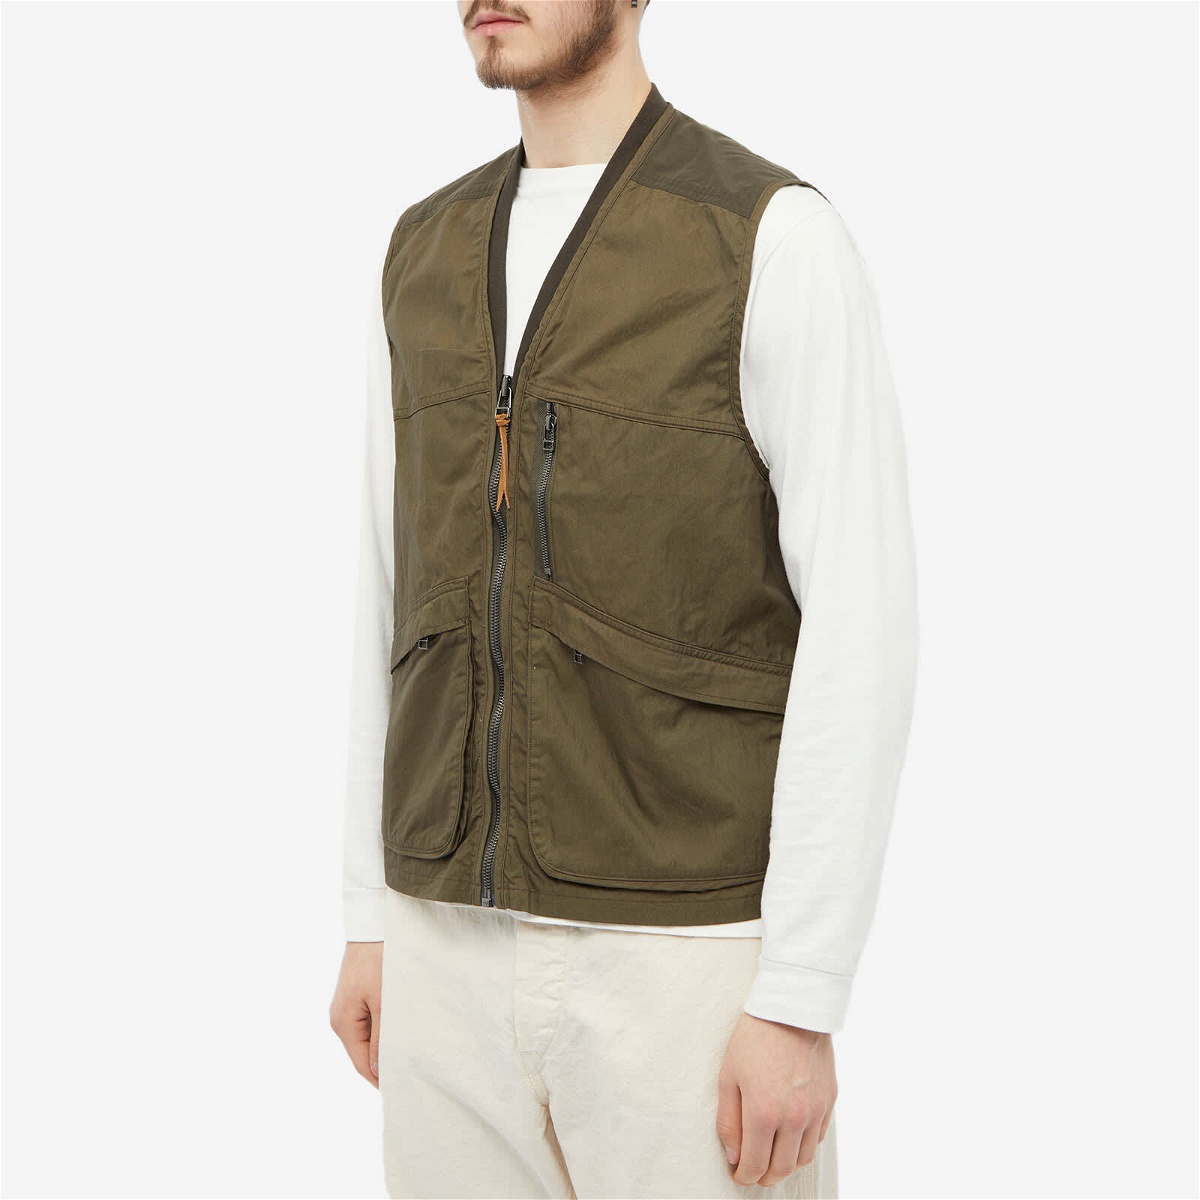 orSlow Men's Cotton Nylon Utility Vest in Army Green orSlow